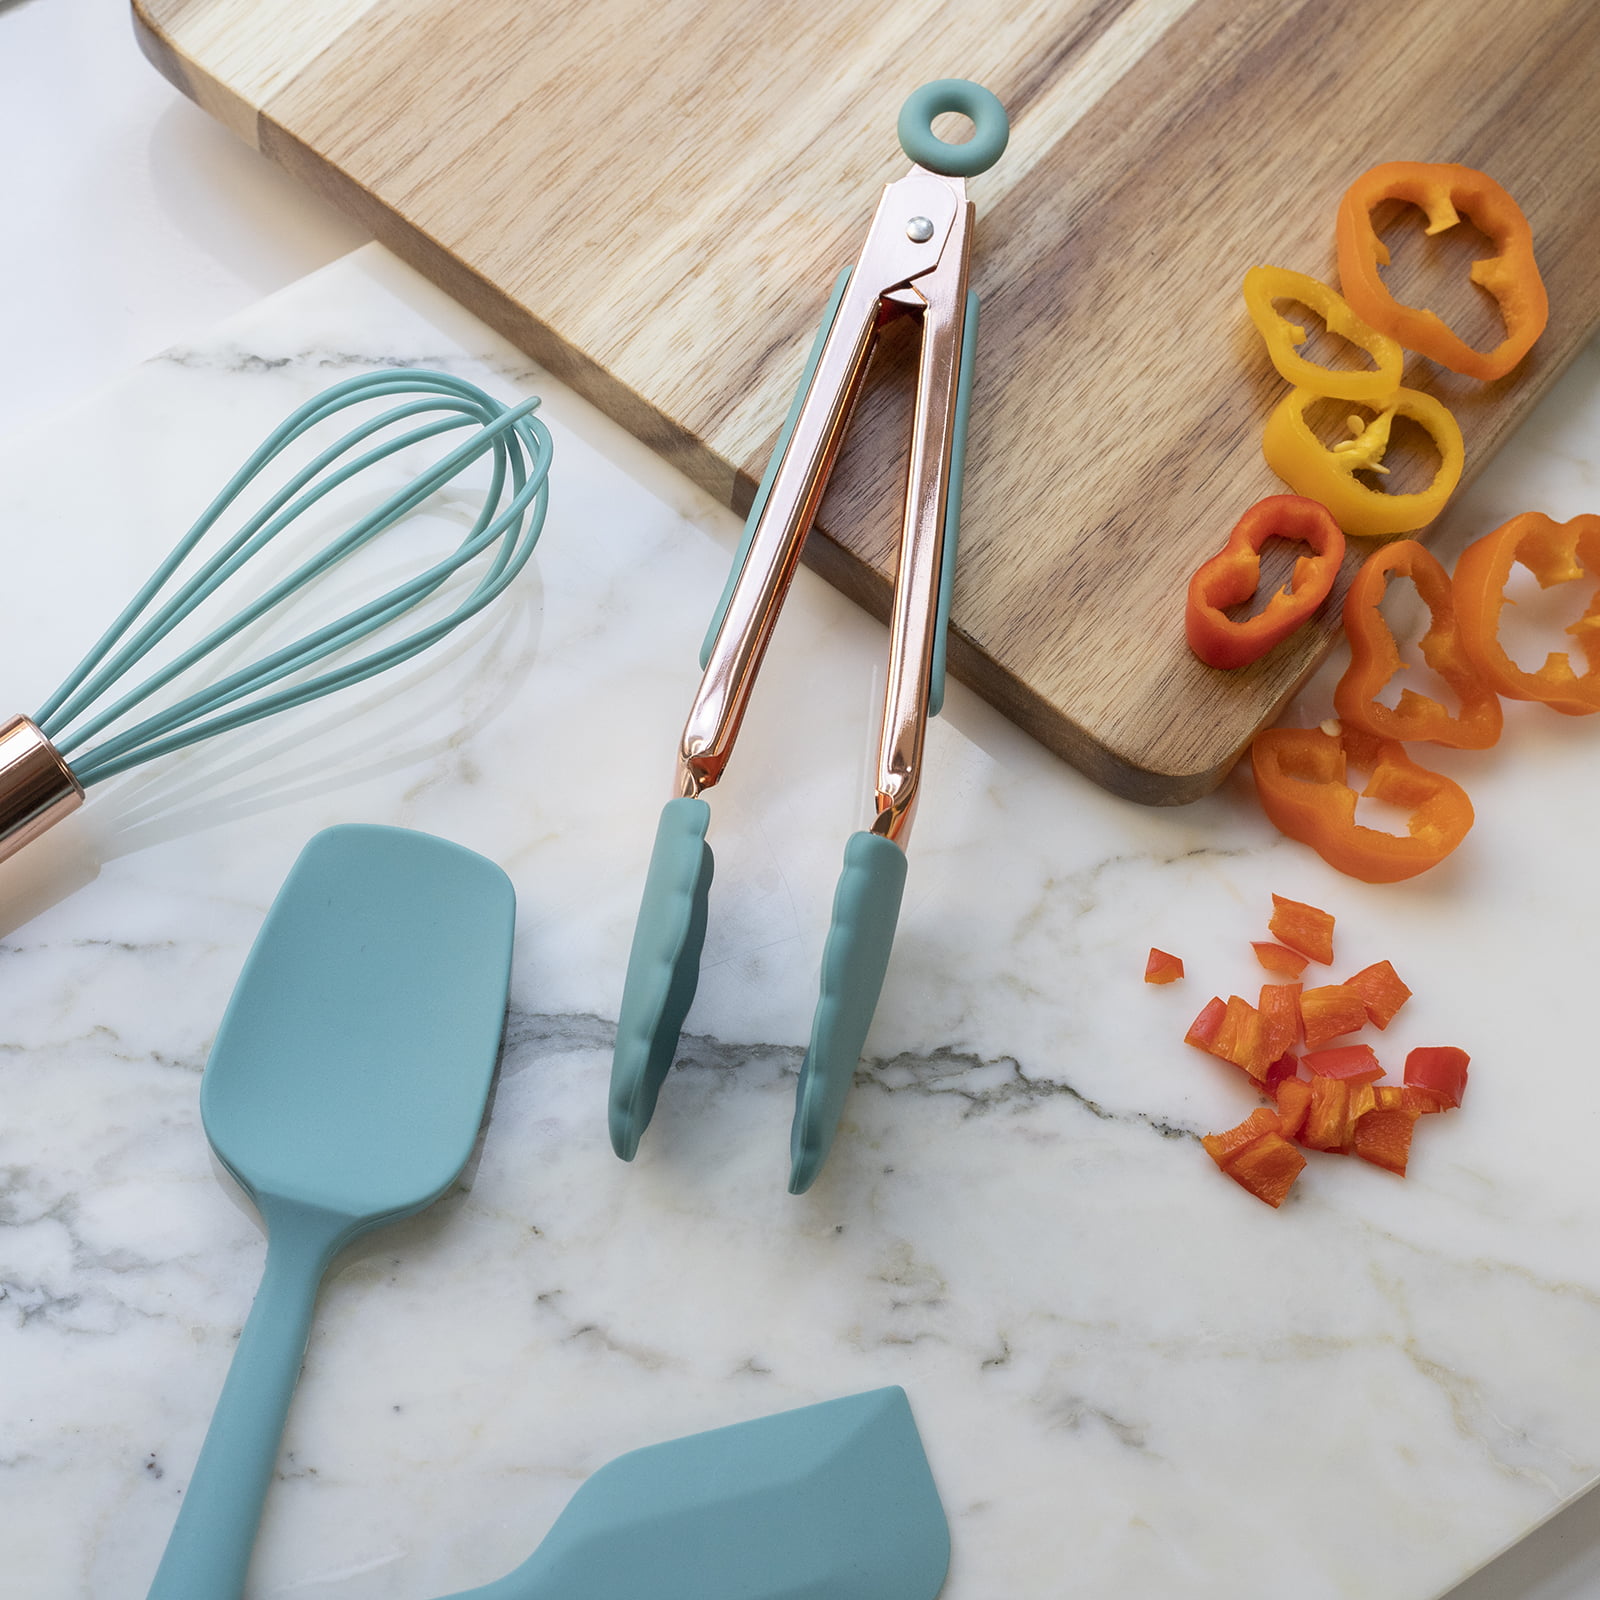 Cook with Color Mini Silicone Kitchen Utensils Set, Whisk, Tongs, Spatula,  Spoonula, Turner, Gray 